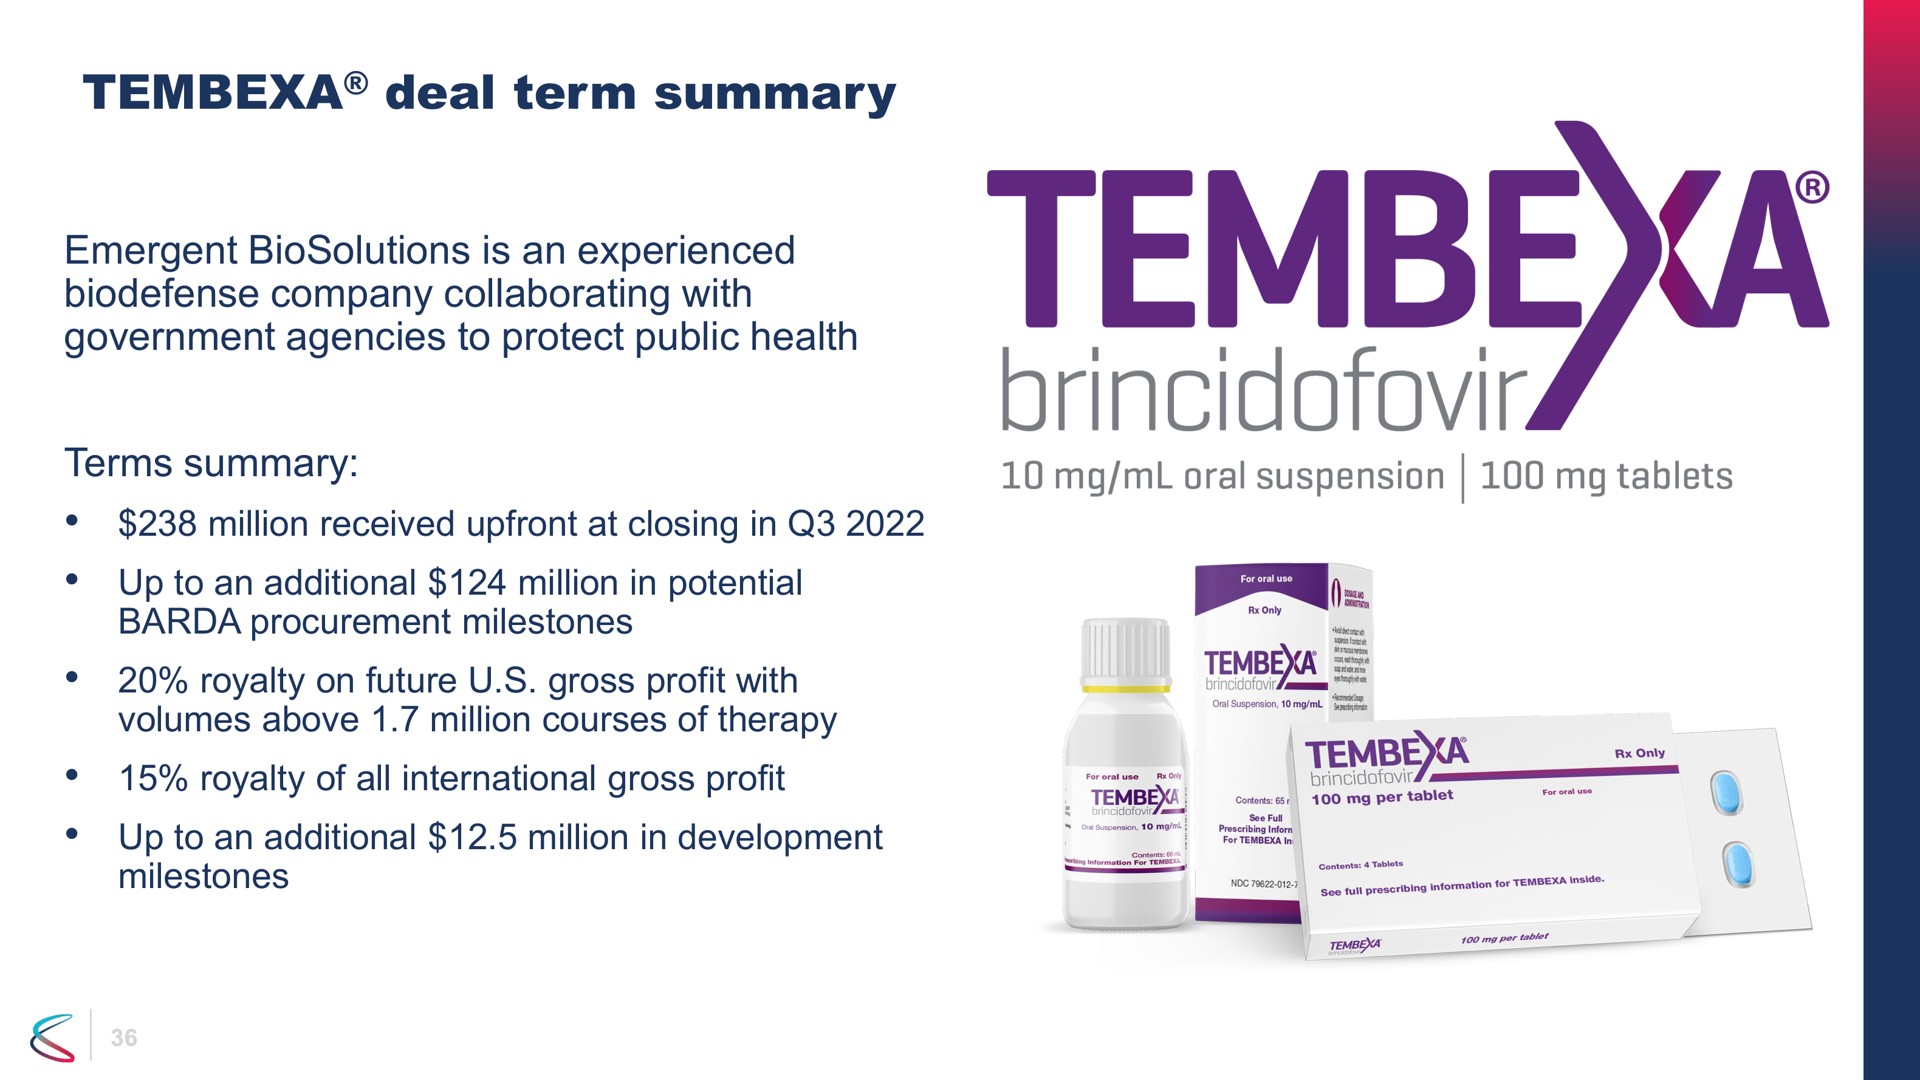 deal term summary company collaborating with government agencies to protect public health terms oral suspension tablets procurement milestones royalty on future gross profit with volumes above million courses of therapy be | Chimerix